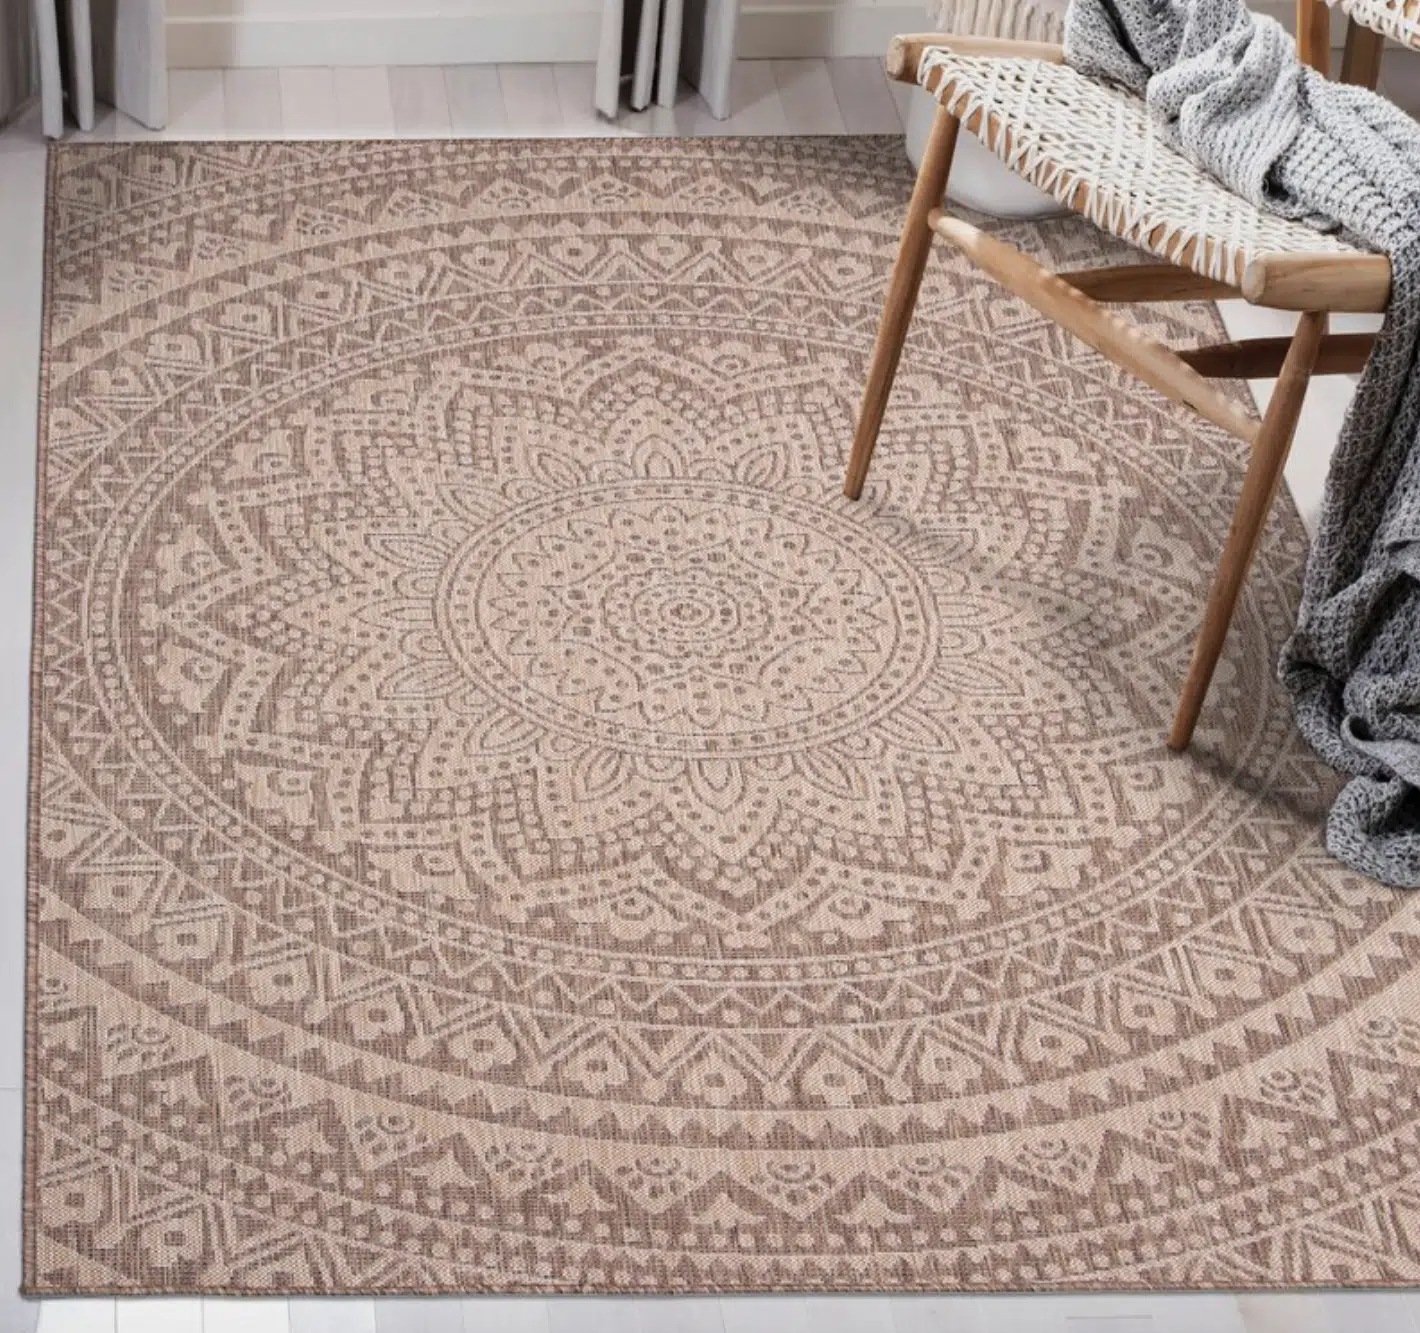 Boho Outdoor rugs, by lifestyle blogger What the Fab